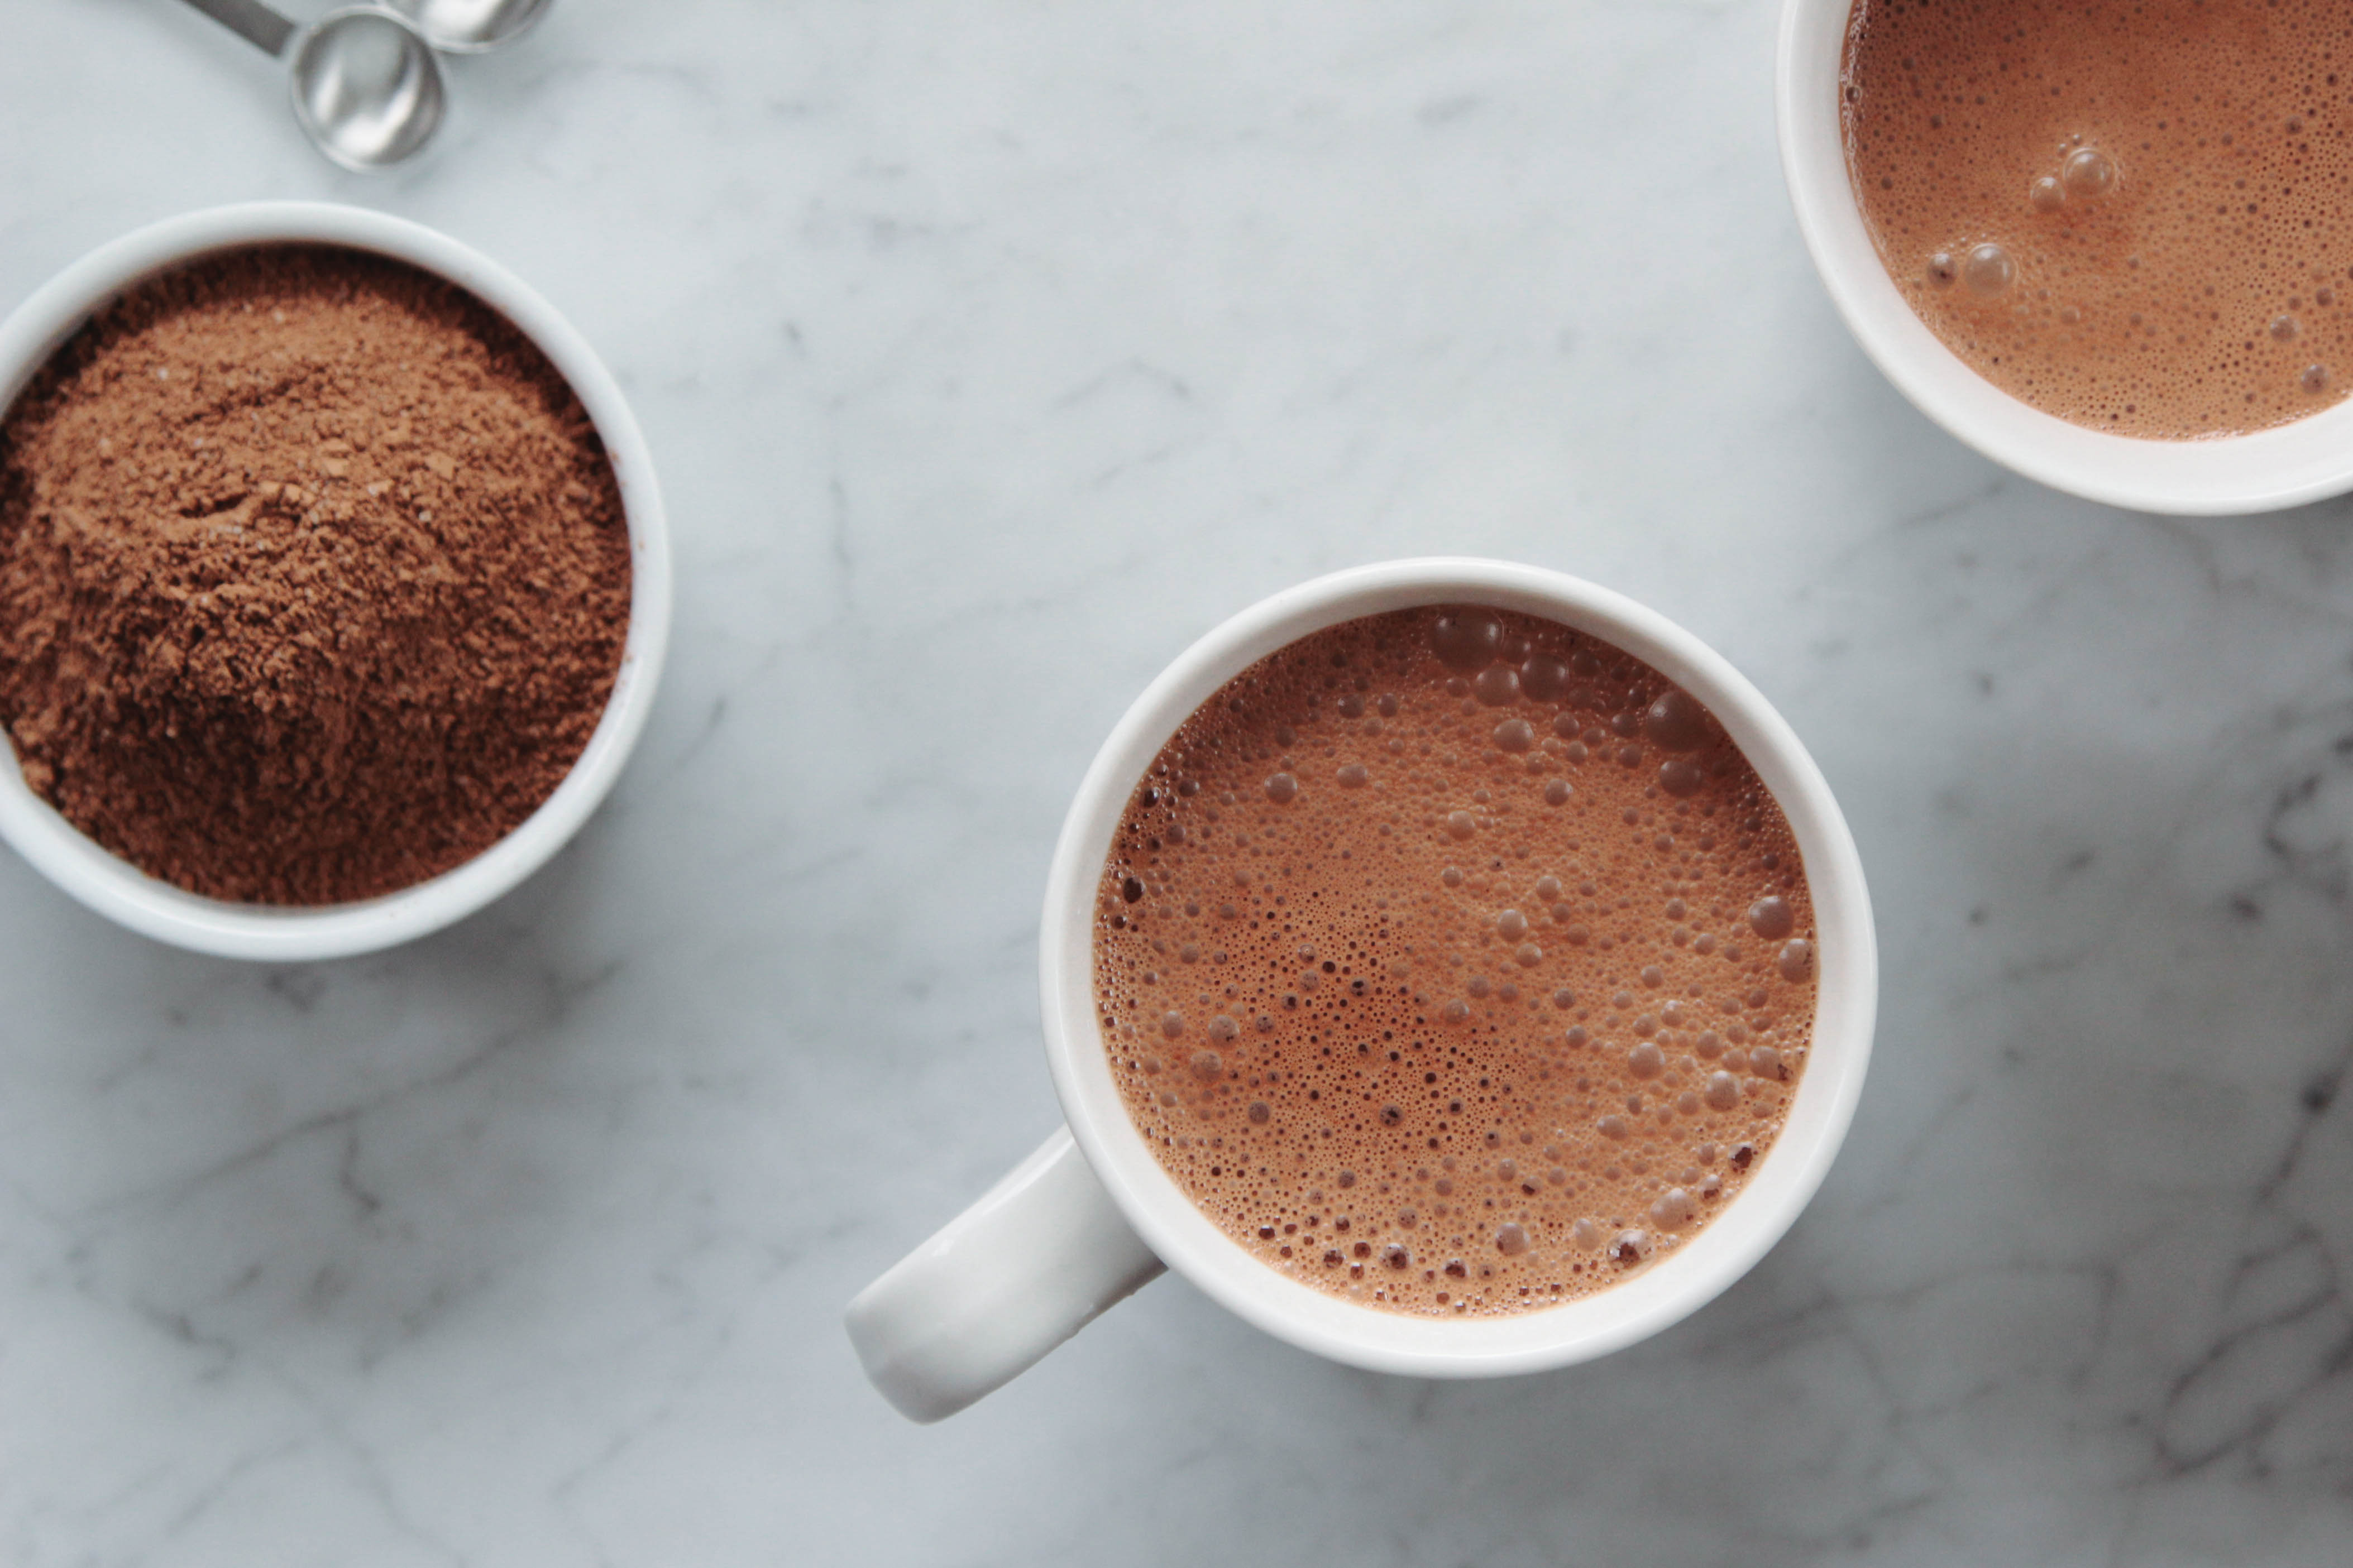 Superfood Hot Chocolate | This healthier hot chocolate is rich, decadent, and deliciously smooth.  Perfect for snowy days & post-sledding coziness!